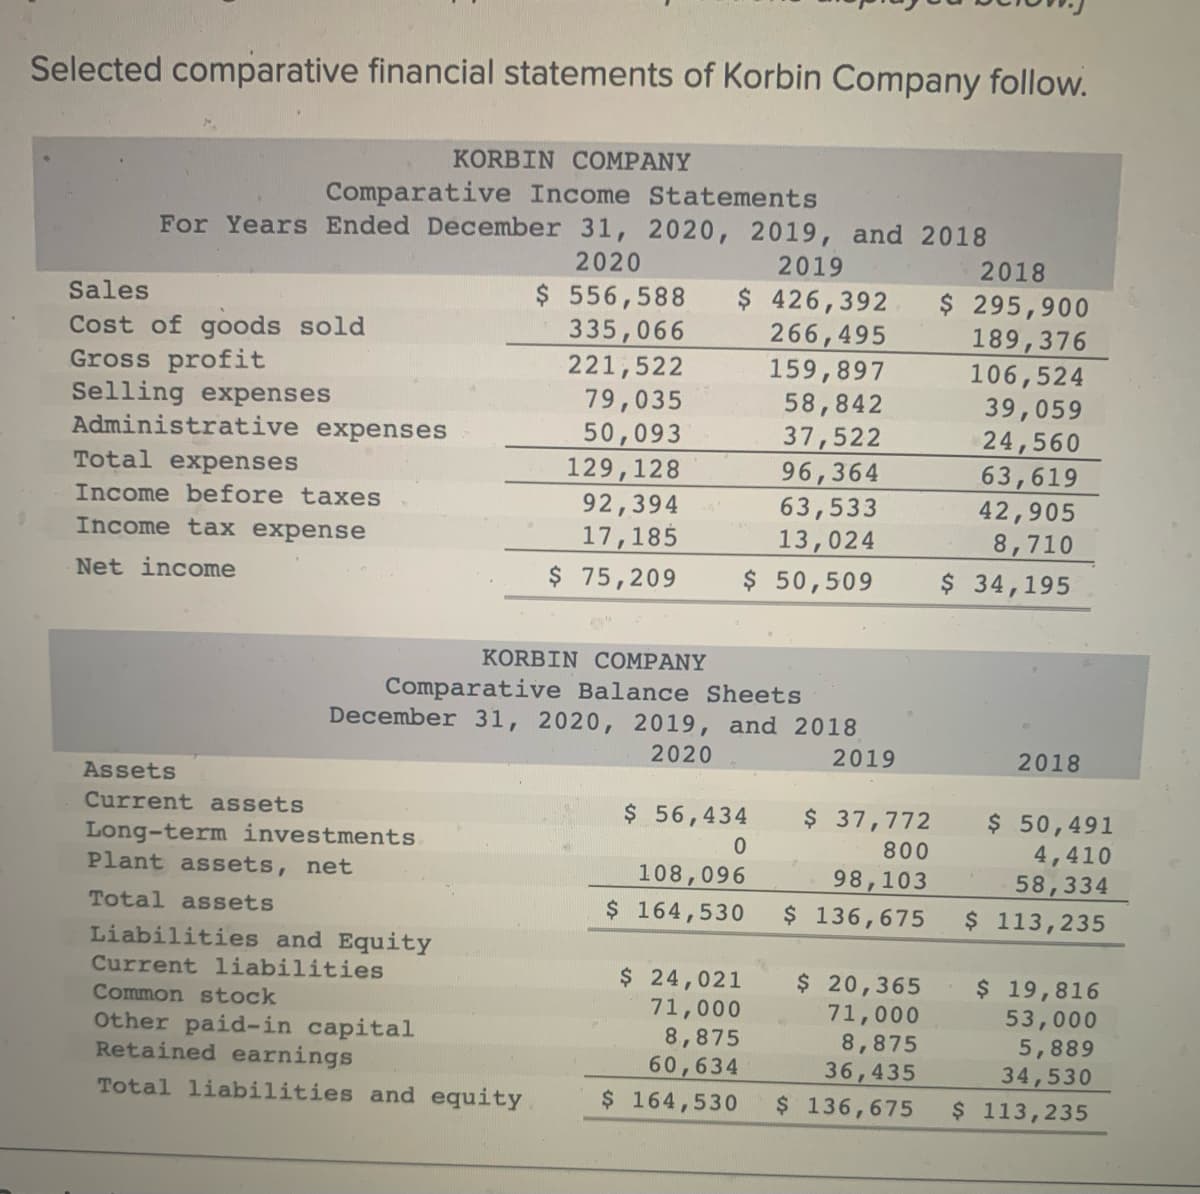 Selected comparative financial statements of Korbin Company follow.
Comparative Income Statements
For Years Ended December 31, 2020, 2019, and 2018
2020
KORBIN COMPANY
Sales
Cost of goods sold
Gross profit
Selling expenses
Administrative expenses
Total expenses
Income before taxes
Income tax expense
Net income
Assets
Current assets
Long-term investments
Plant assets, net
Total assets
2019
2018
$ 556,588 $426,392 $ 295,900
335,066
189,376
Liabilities and Equity
Current liabilities
Common stock
Other paid-in capital
Retained earnings
Total liabilities and equity
221,522
79,035
50,093
129, 128
92,394
17,185
$ 75,209
0"
KORBIN COMPANY
Comparative Balance Sheets
December 31, 2020, 2019, and 2018
2020
2019
96,364
63,533
13,024
$ 50,509
$ 56,434
0
266,495
159,897
58,842
37,522
108,096
$164,530
$ 24,021
71,000
8,875
60,634
$ 164,530
$ 37,772
800
98,103
$ 136,675
$ 20,365
71,000
8,875
36,435
$ 136,675
106,524
39,059
24,560
63,619
42,905
8,710
$ 34,195
2018
$ 50,491
4,410
58,334
$ 113,235
$ 19,816
53,000
5,889
34,530
$ 113,235